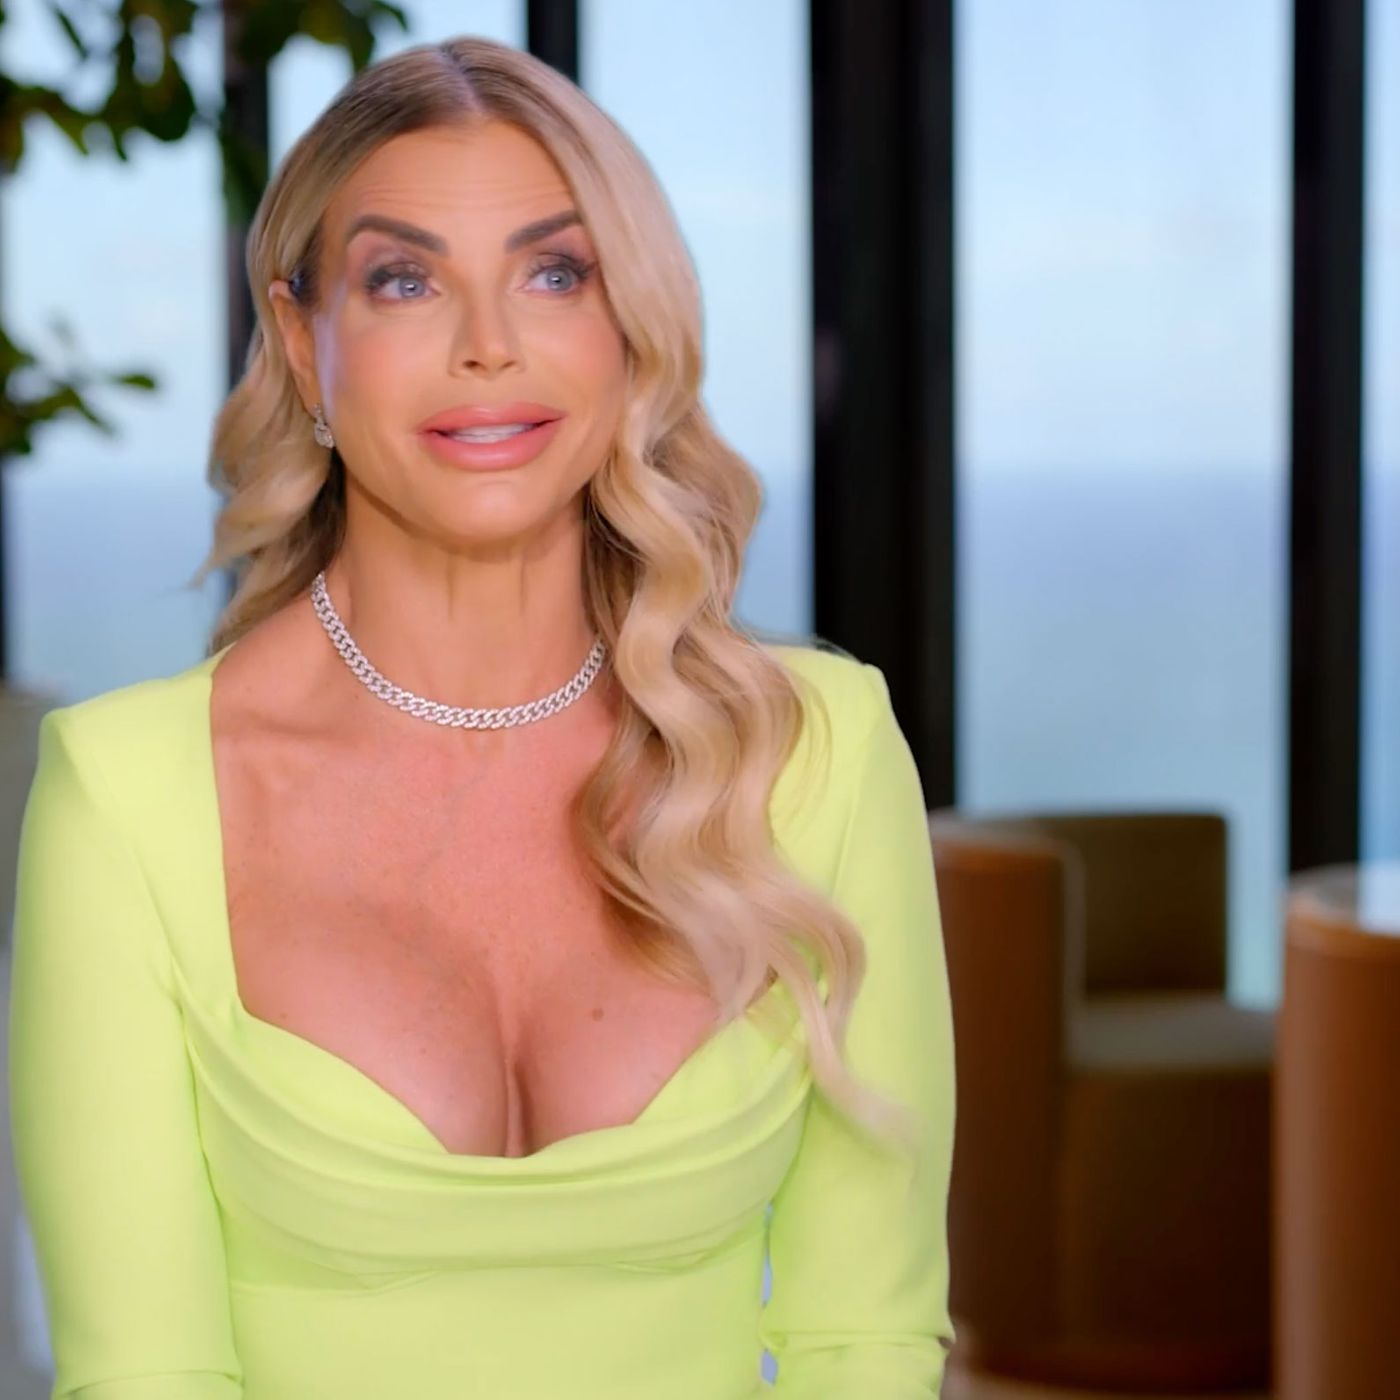 The Real Housewives of Miami Season 5, Episode 11 Recap pic